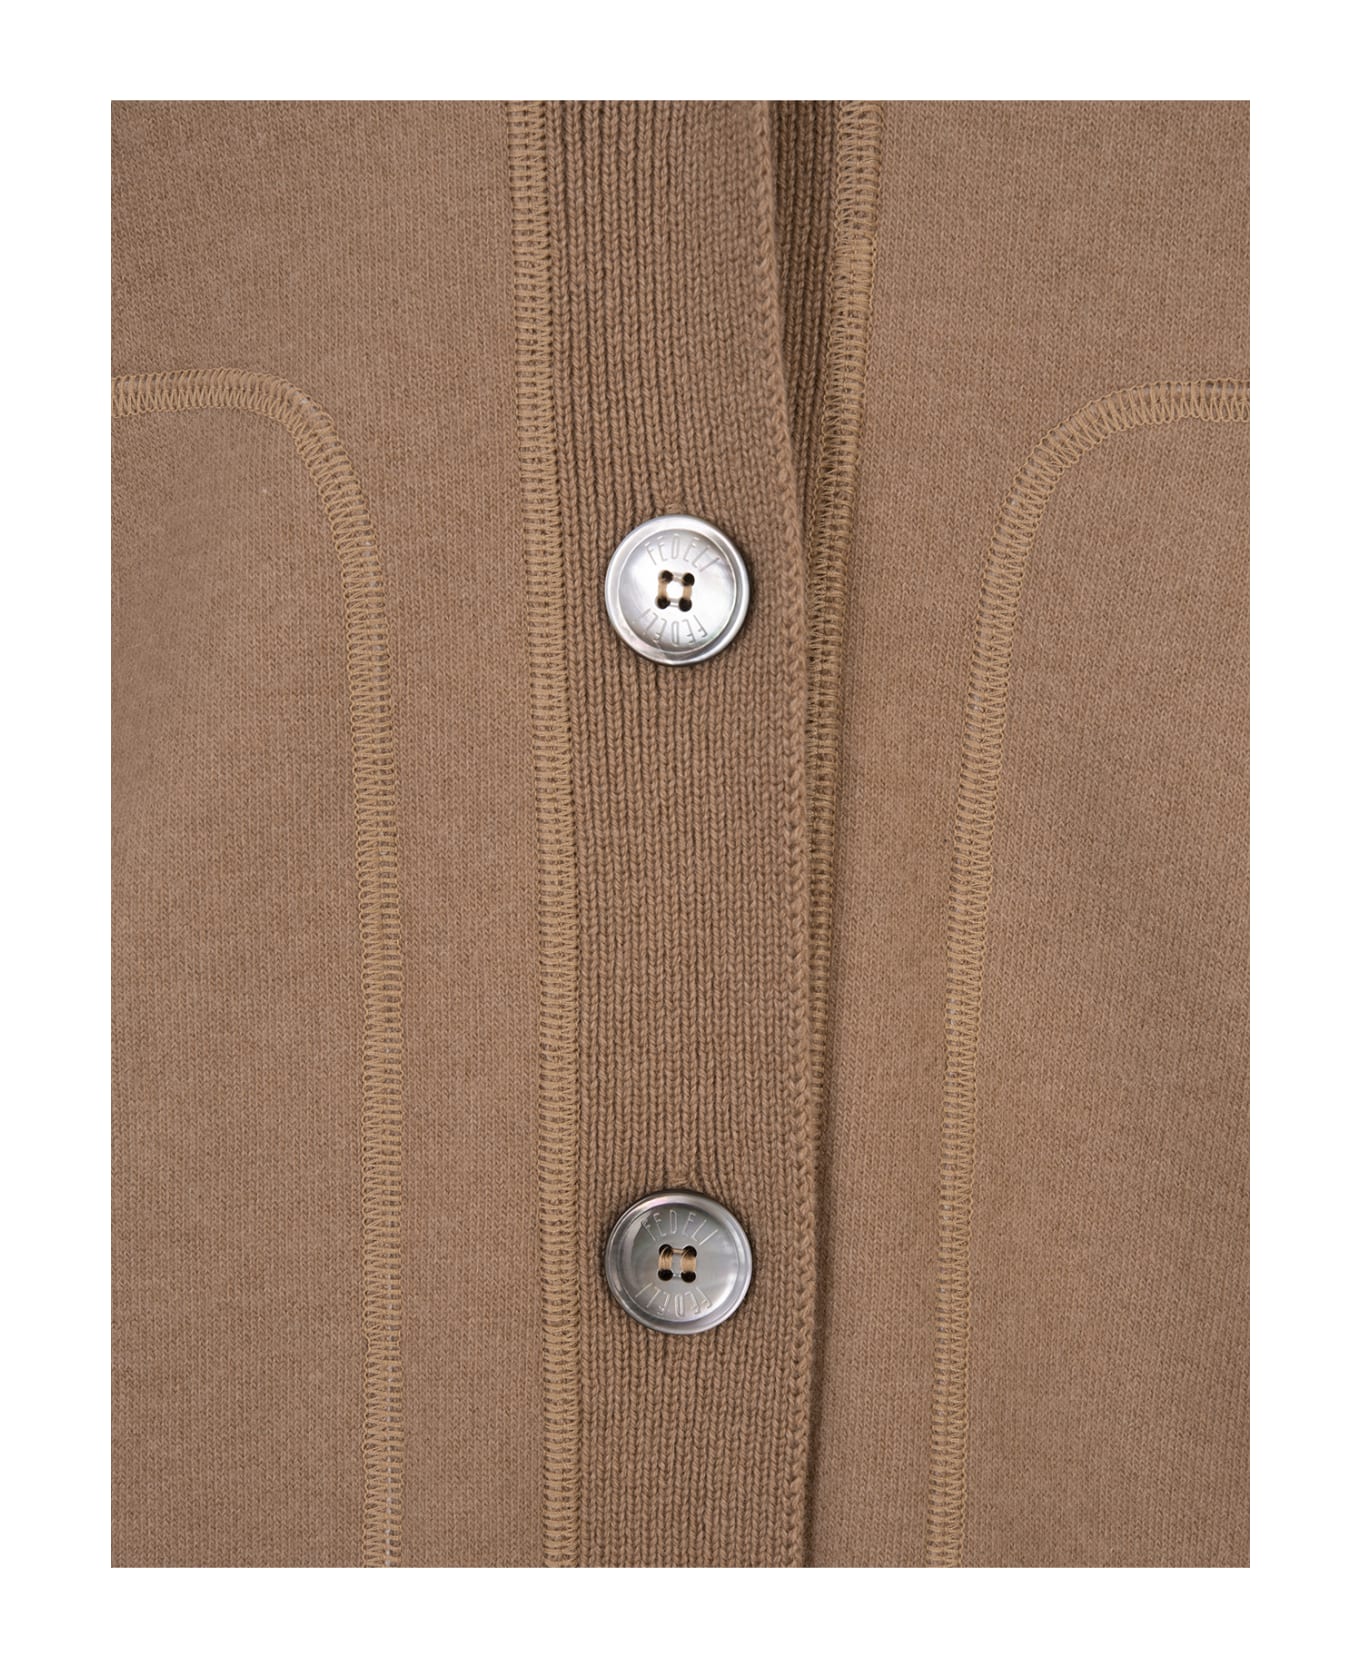 Fedeli Maxi Cardigan With Buttons In Camel Cashmere - Brown カーディガン